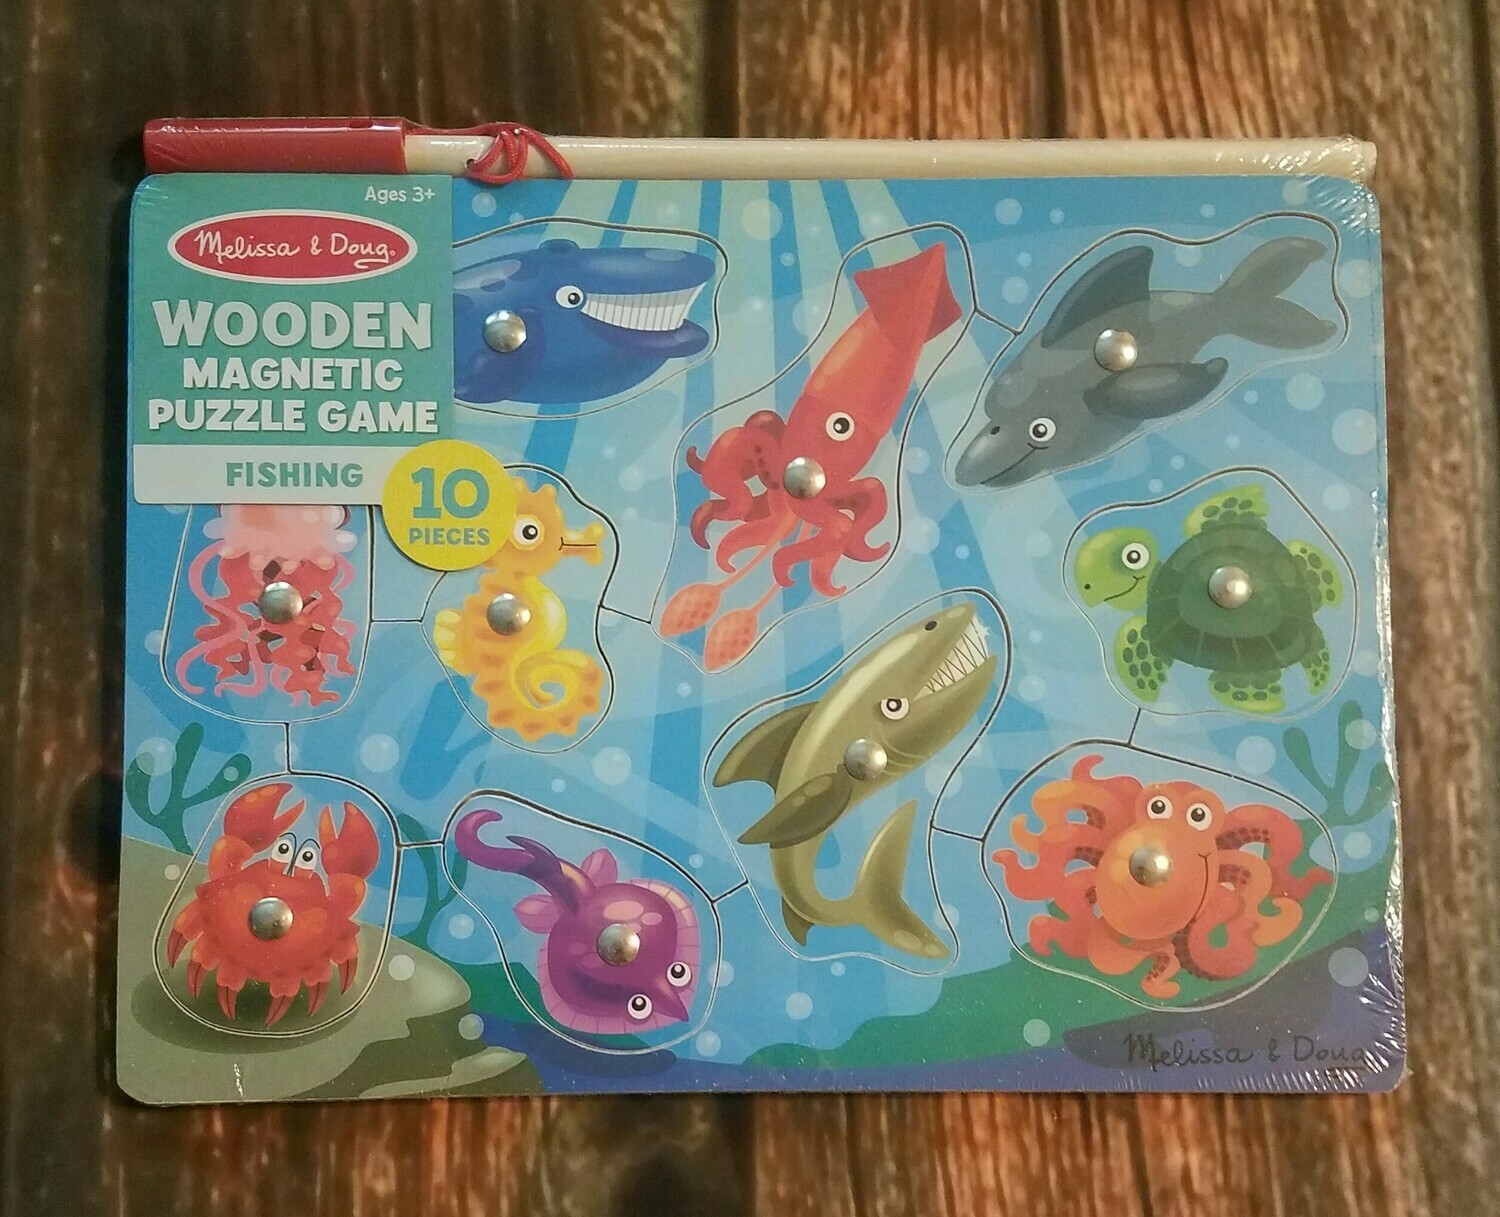 Fishing Wooden Magnetic Puzzle Game